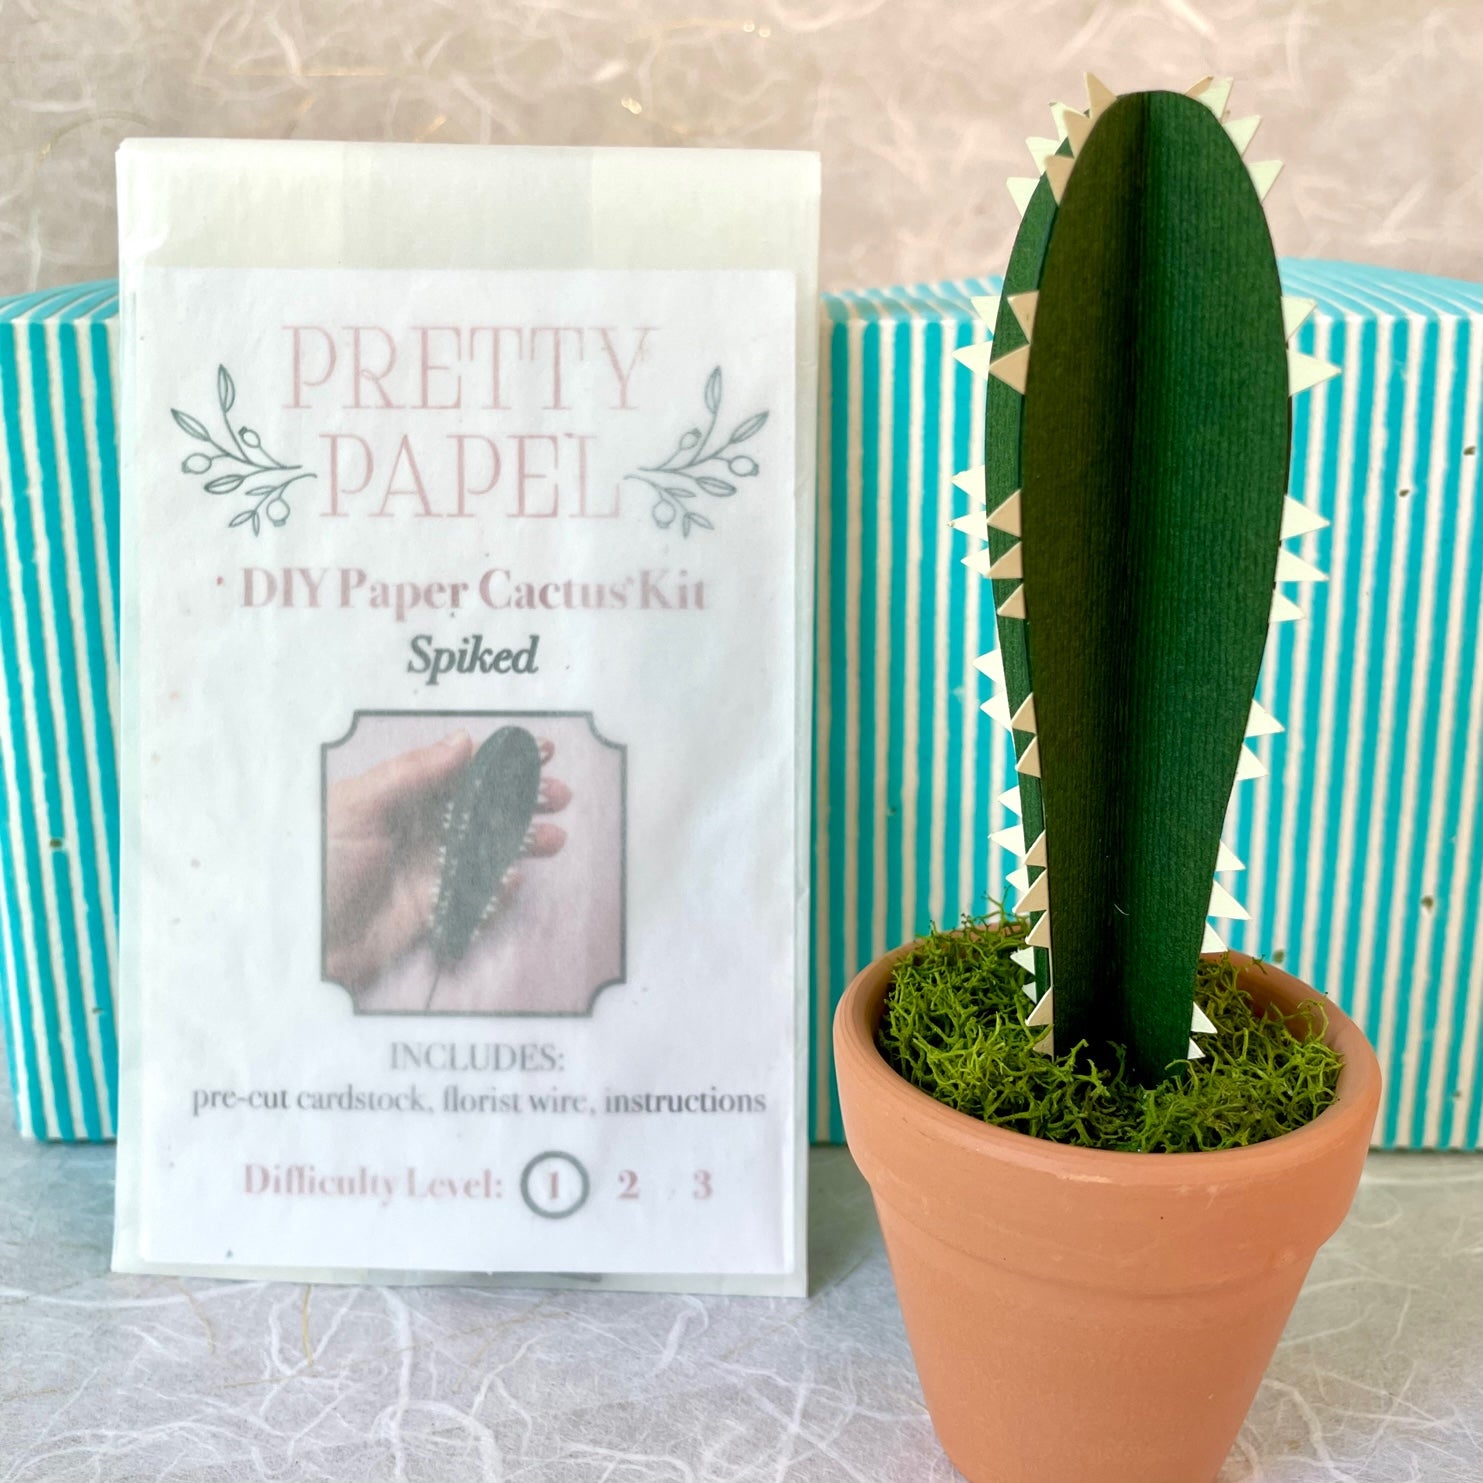 DIY Paper Cactus Kit, Spiked – Pretty Papel